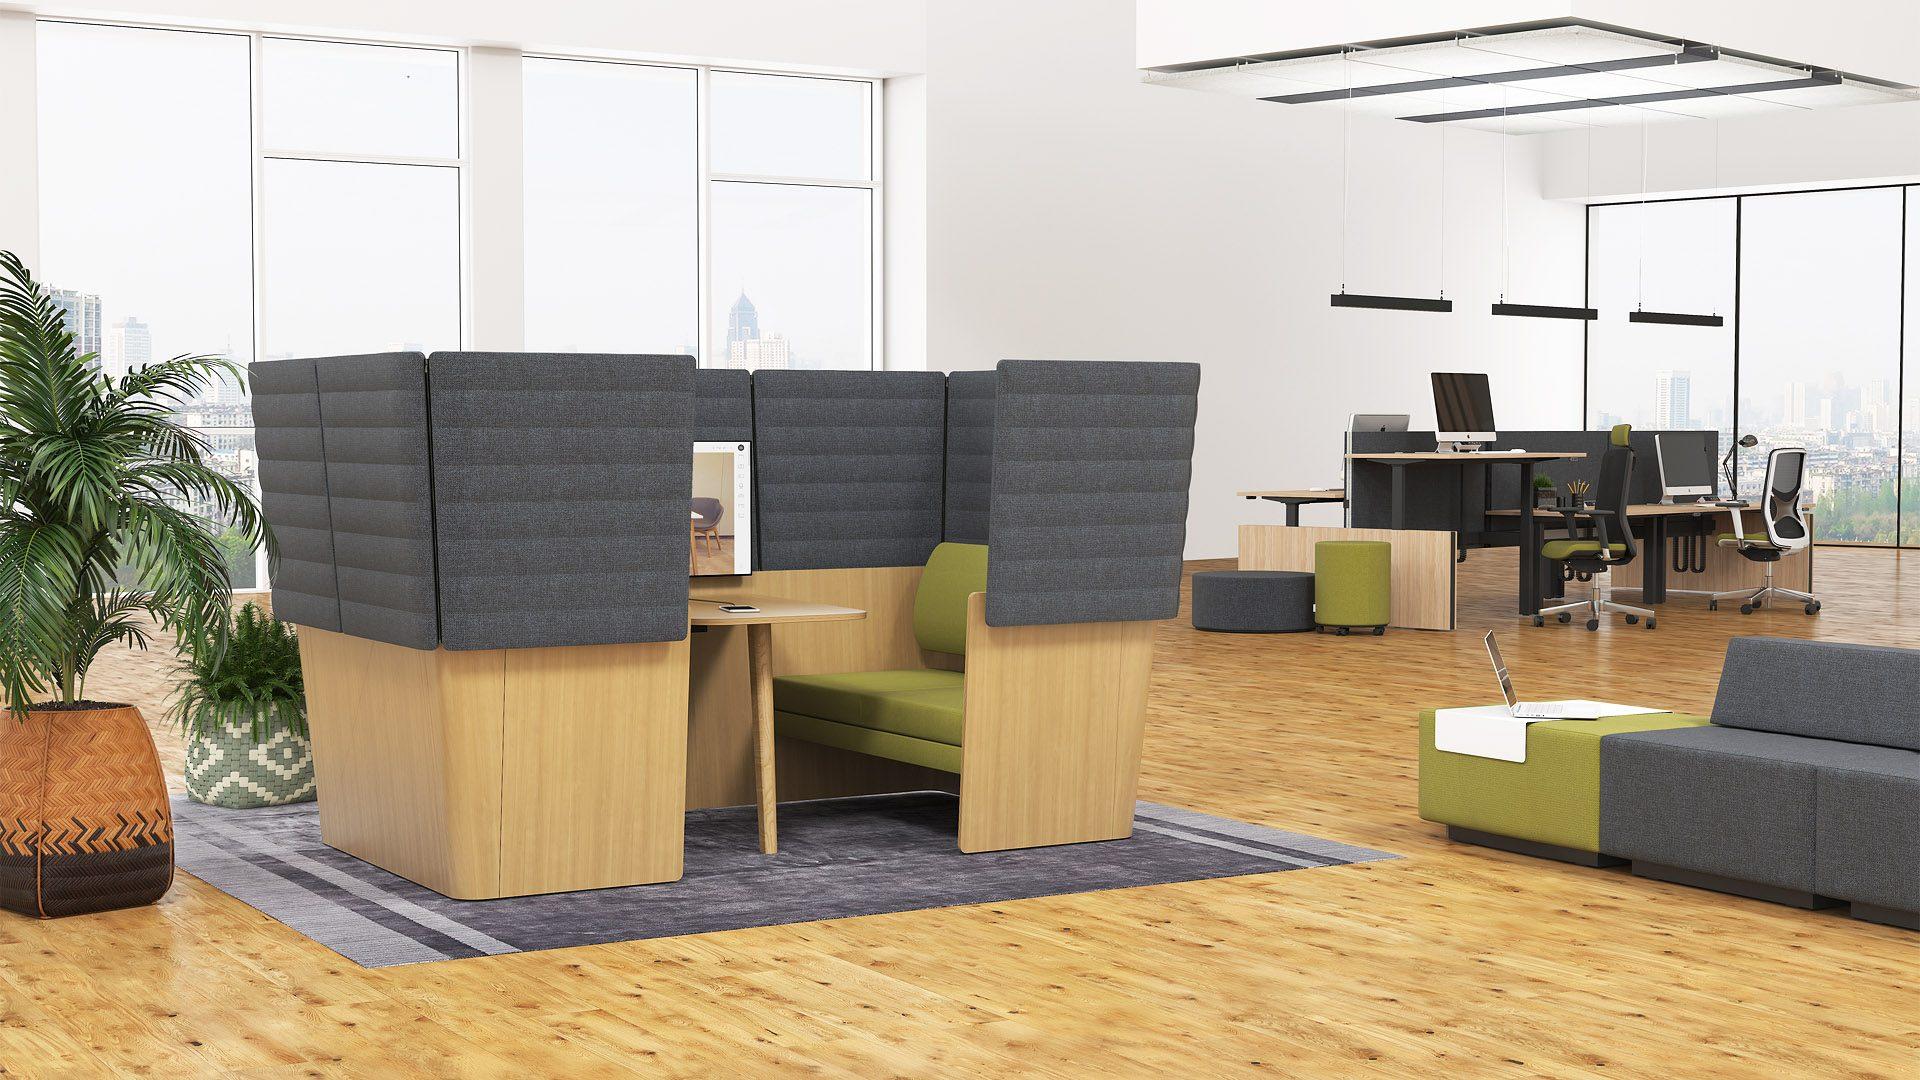 Arcipelago Wood meeting booths are ideal for creating a &#039;room within a room&#039; in open-plan offices